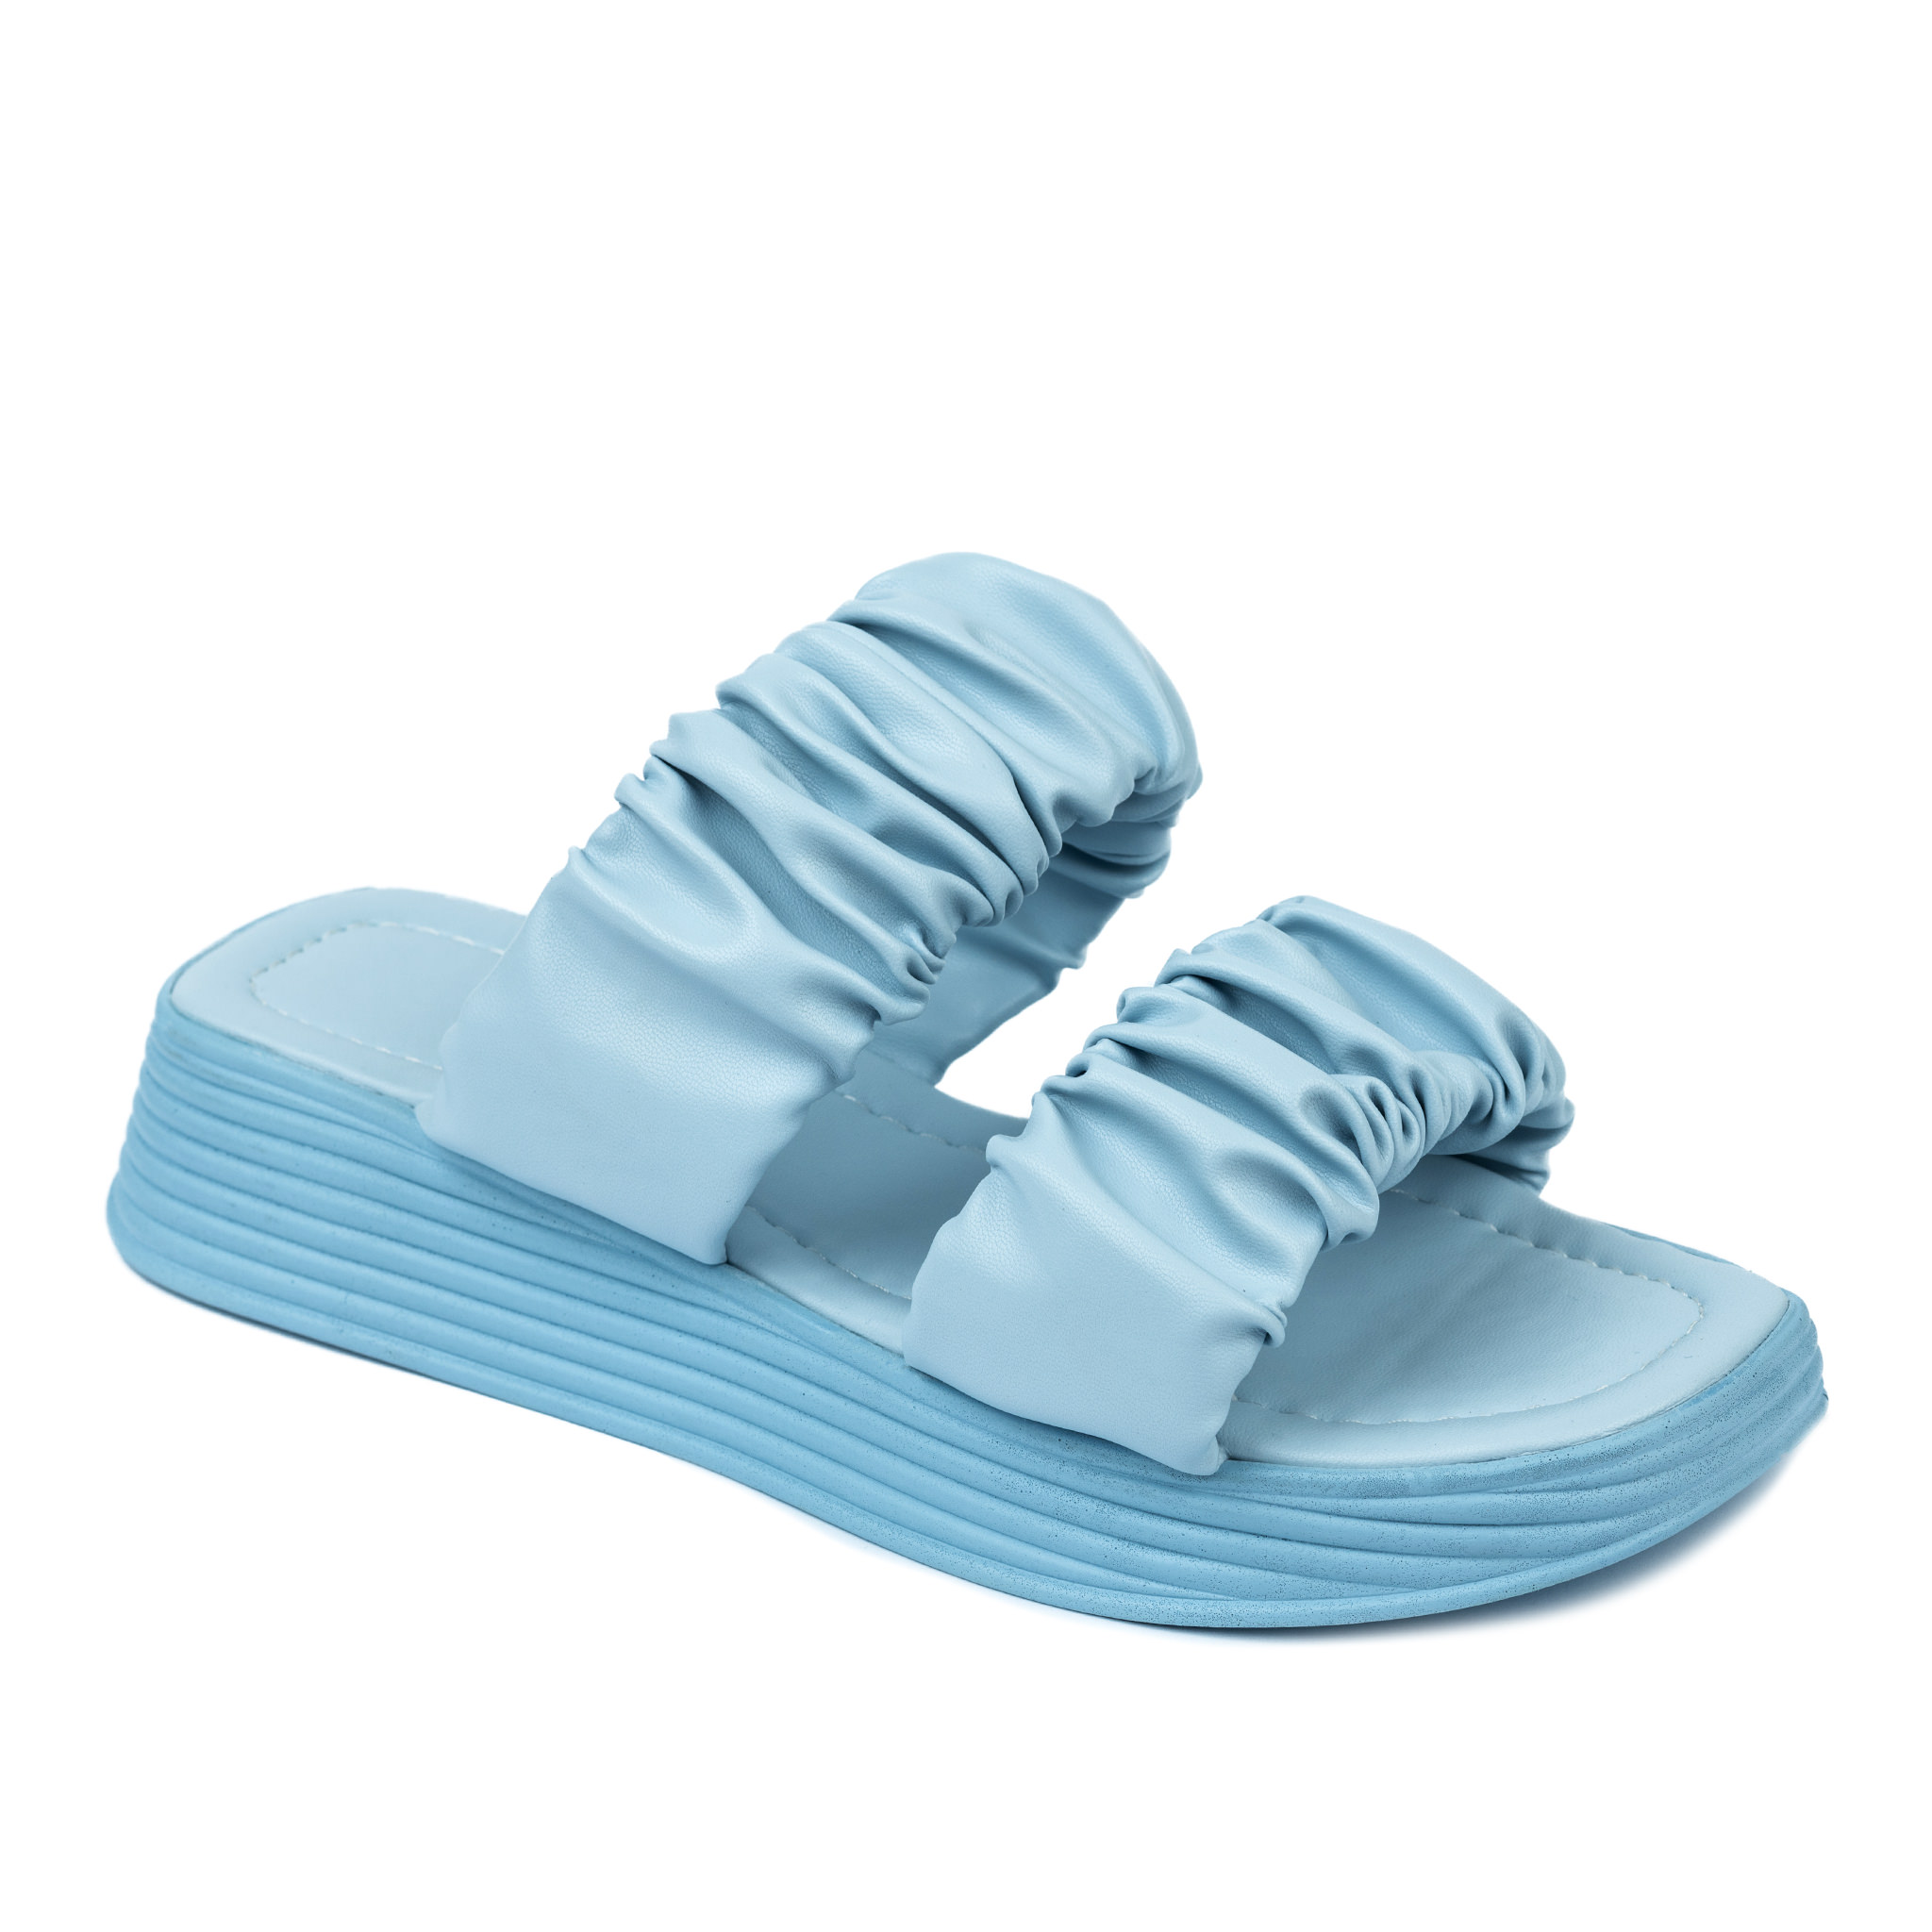 Women Slippers and Mules A430 - BLUE